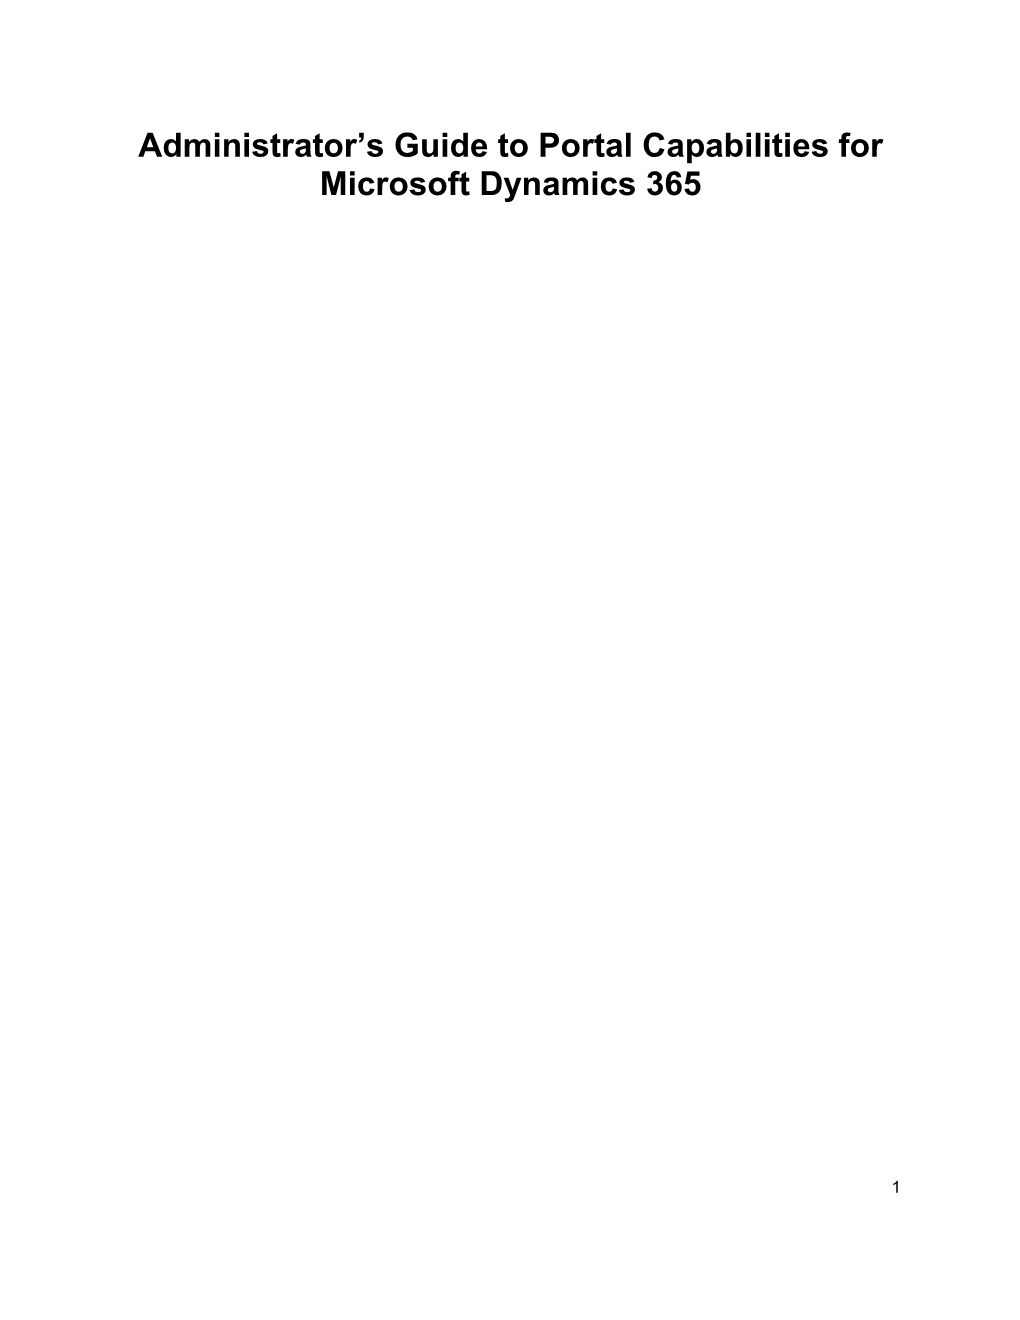 Administrator's Guide to Portal Capabilities for Microsoft Dynamics